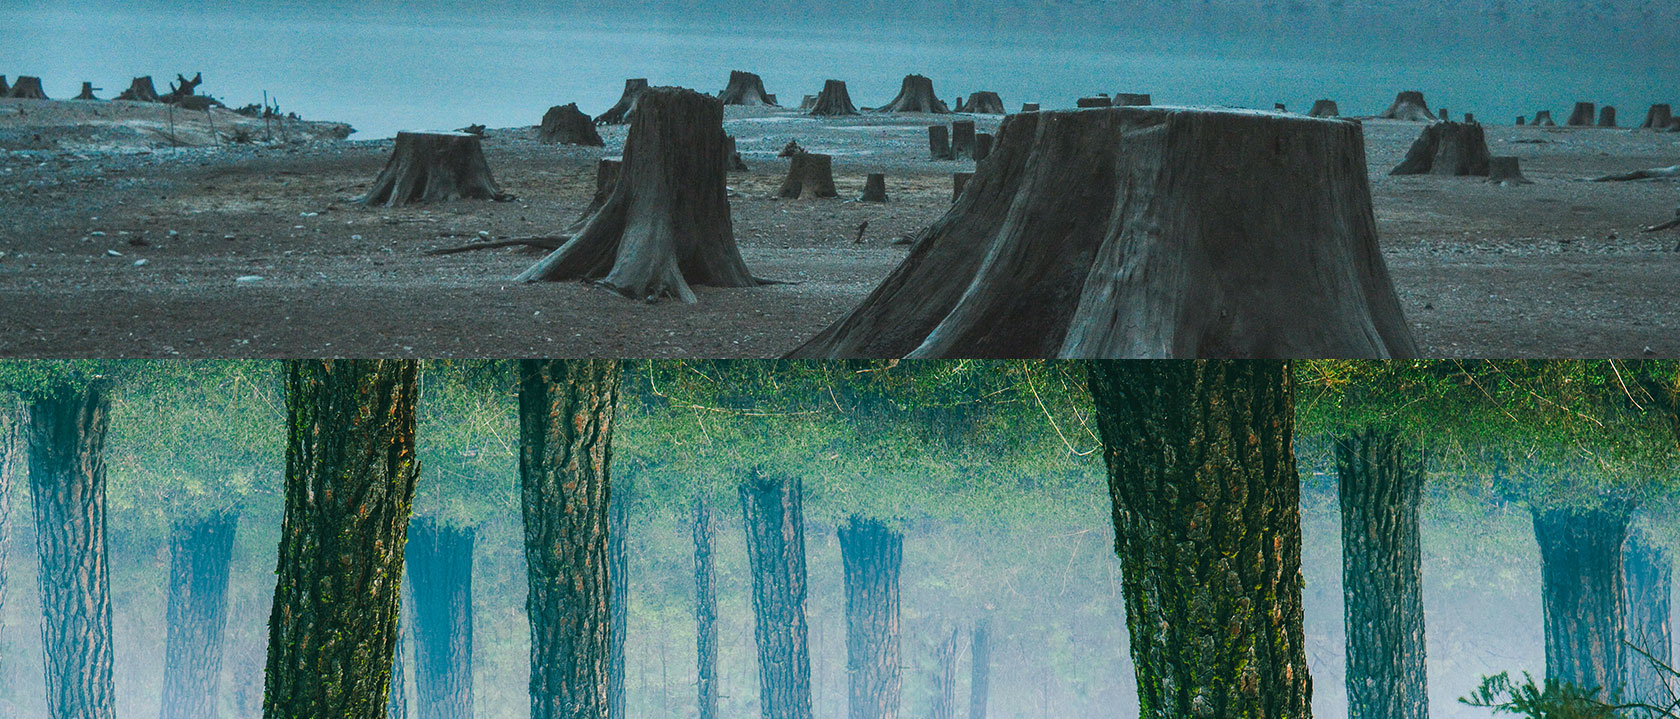 Healthy forest full of green trees versus dead forest with felled trees